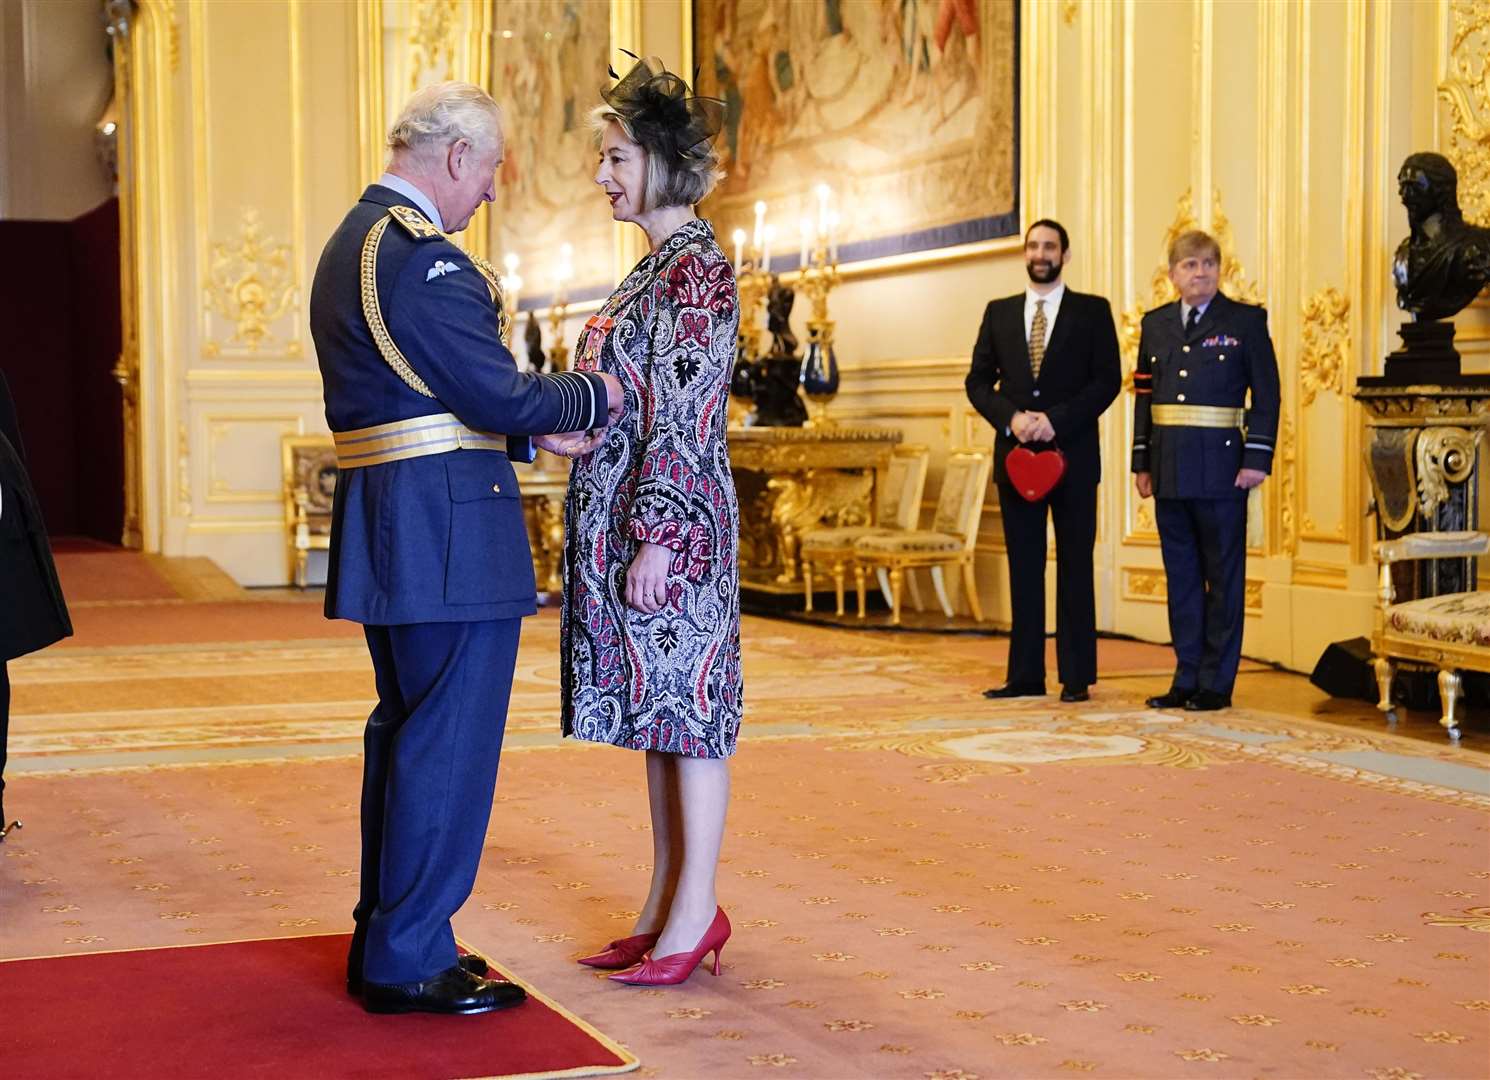 Dame Maureen Lipman receives her award from the Prince of Wales (Aaron Chown/PA)